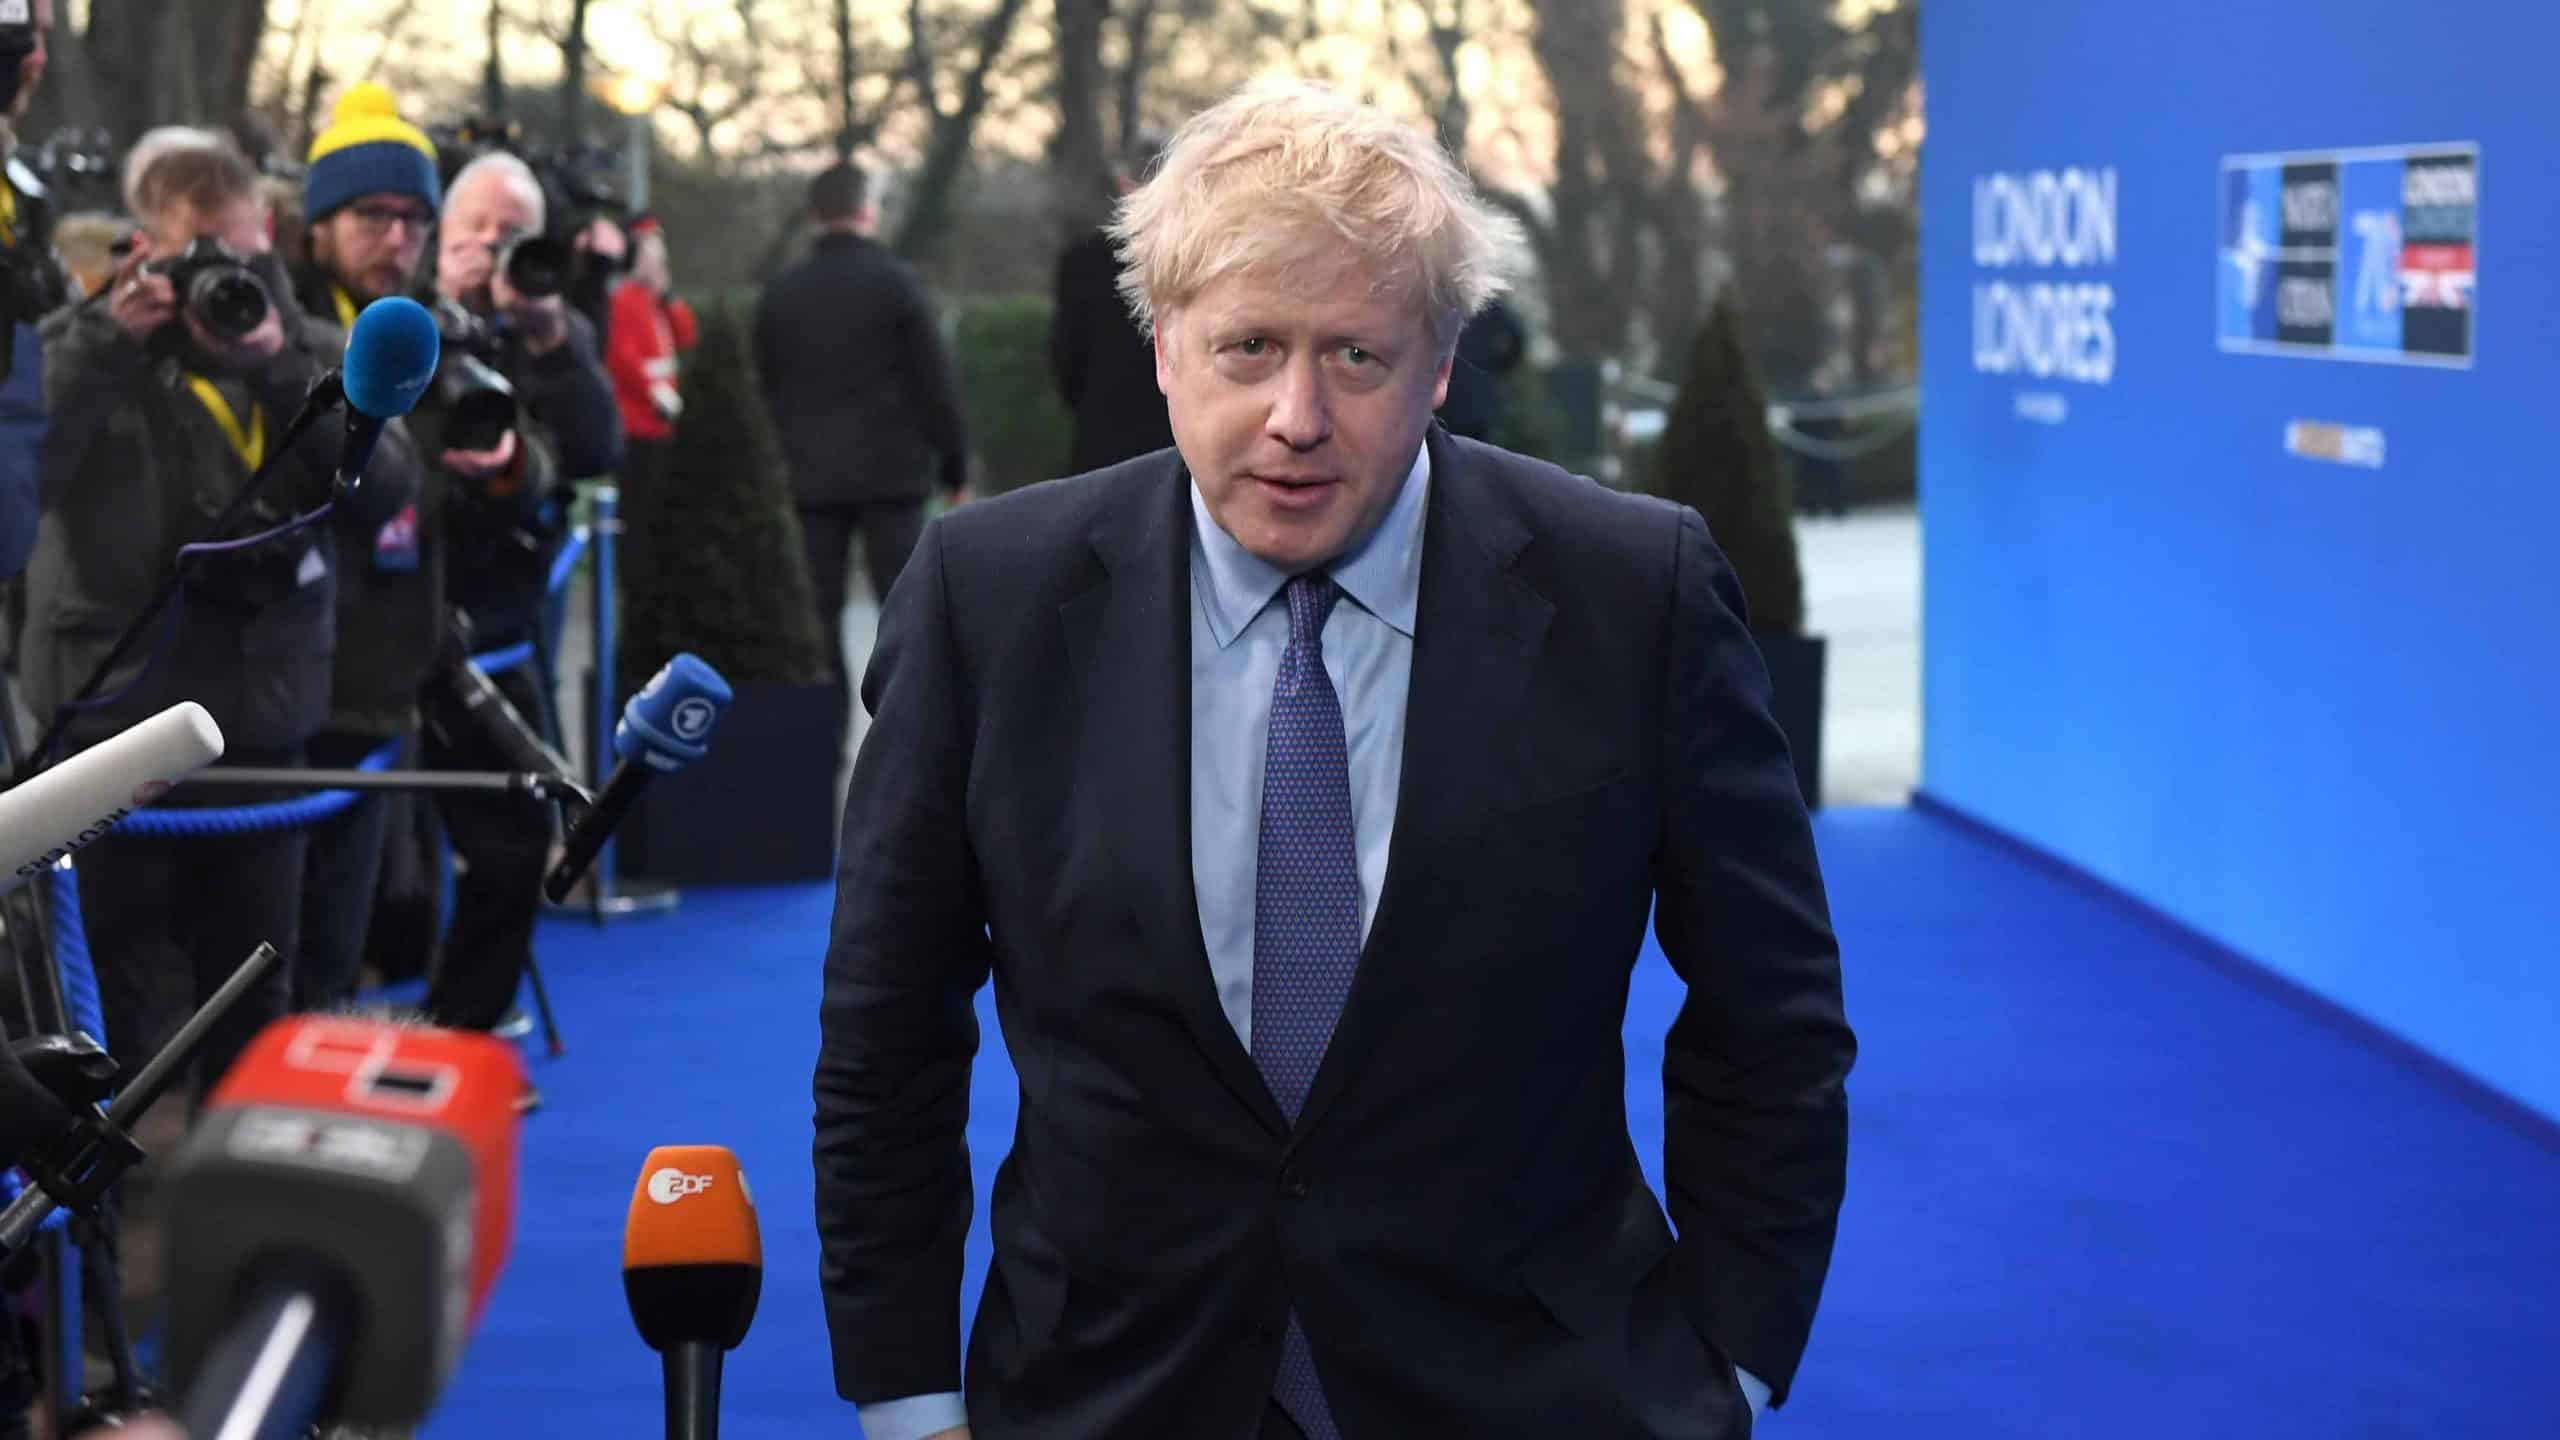 Johnson urges Nato leaders to remain united amid tensions in the alliance